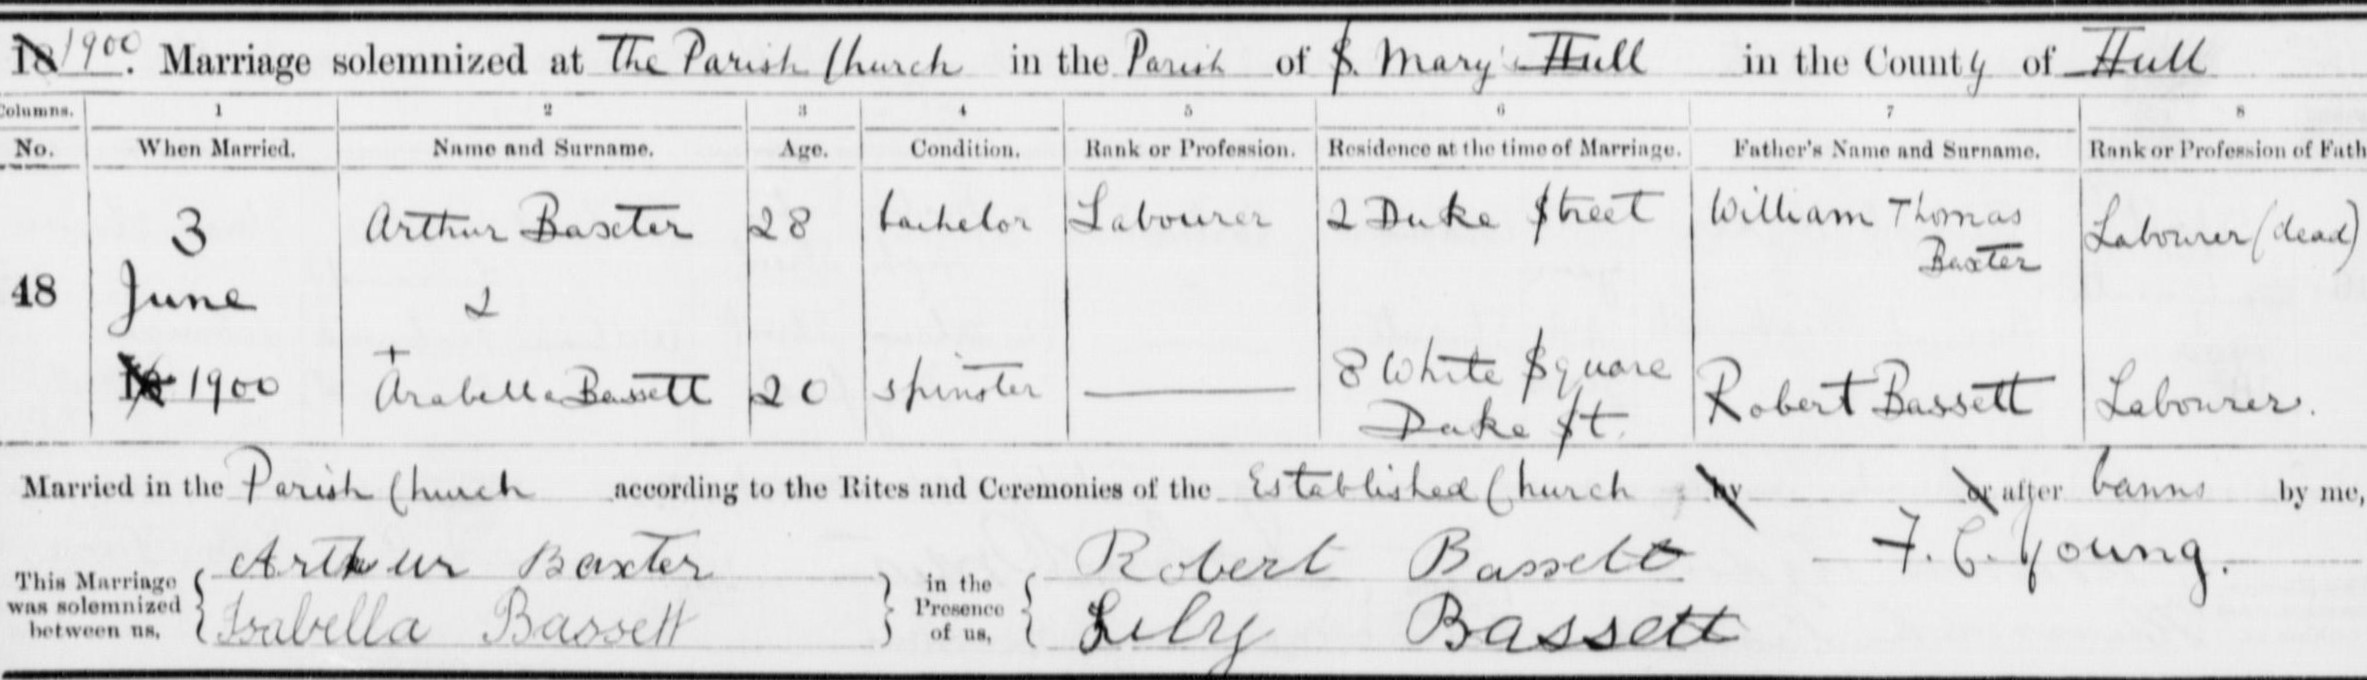 Marriage Record of Arthur A Baxter and Arabella Bassettcroped.jpg